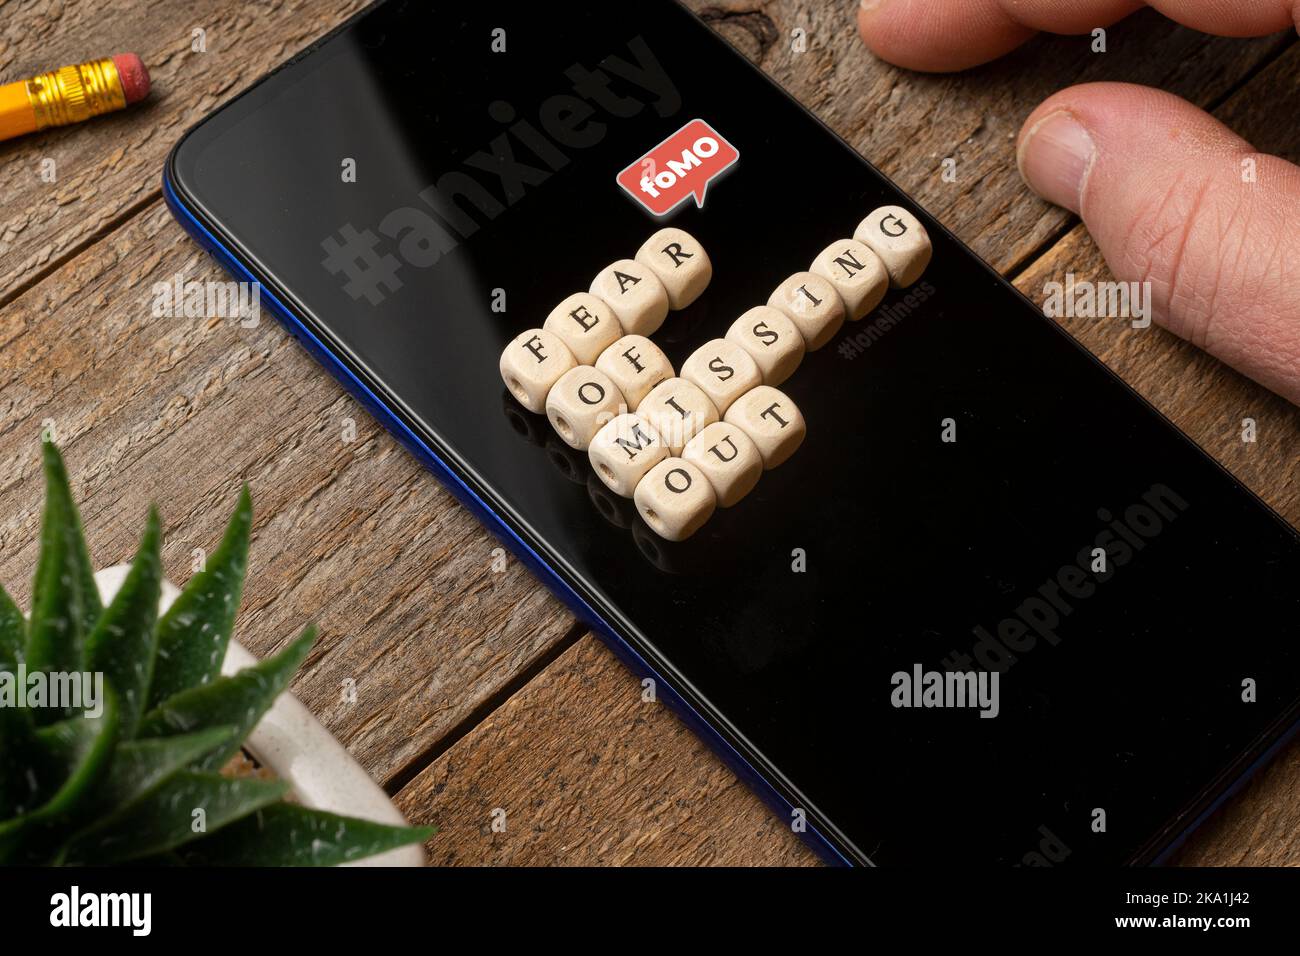 Fear of missing out (fomo) concept: smartphone on a wooden table with some die composing a sentence. Stock Photo